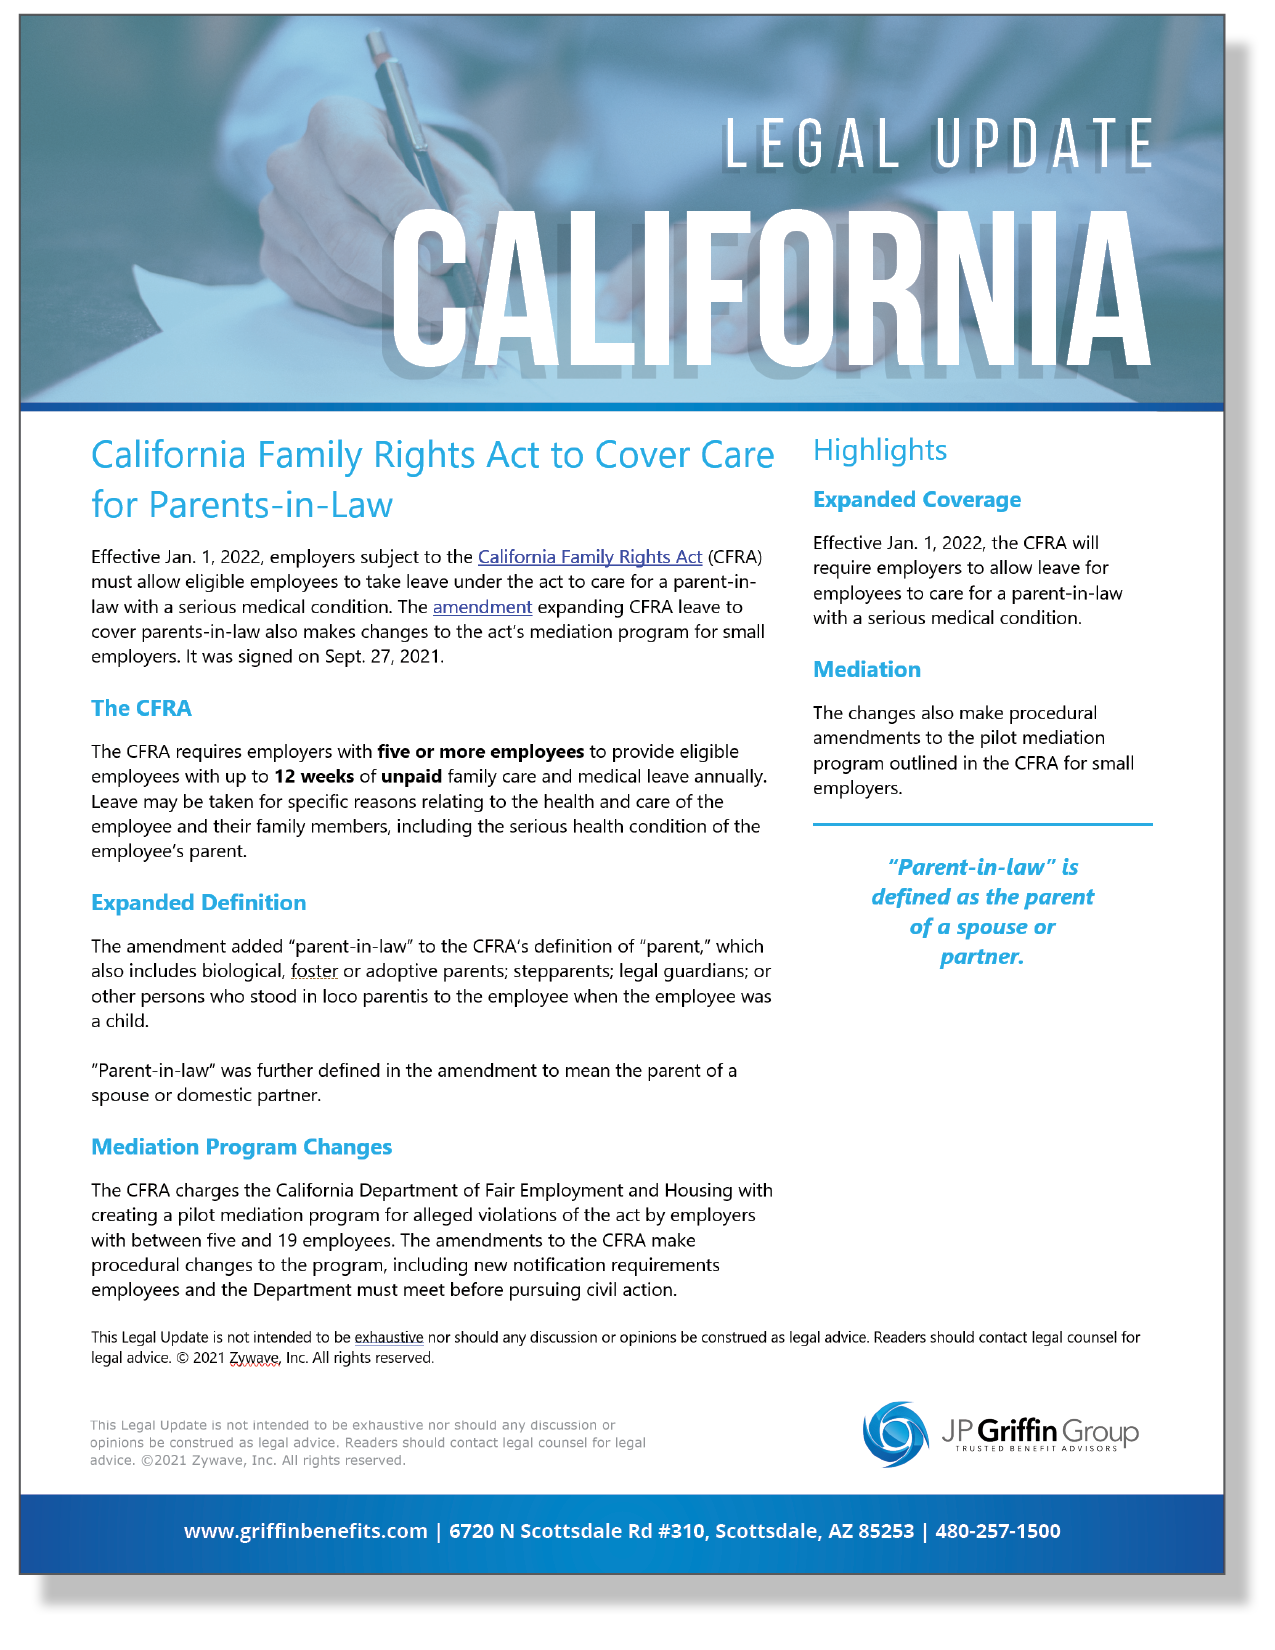 California Family Rights Act to Cover Care for Parents-in-Law